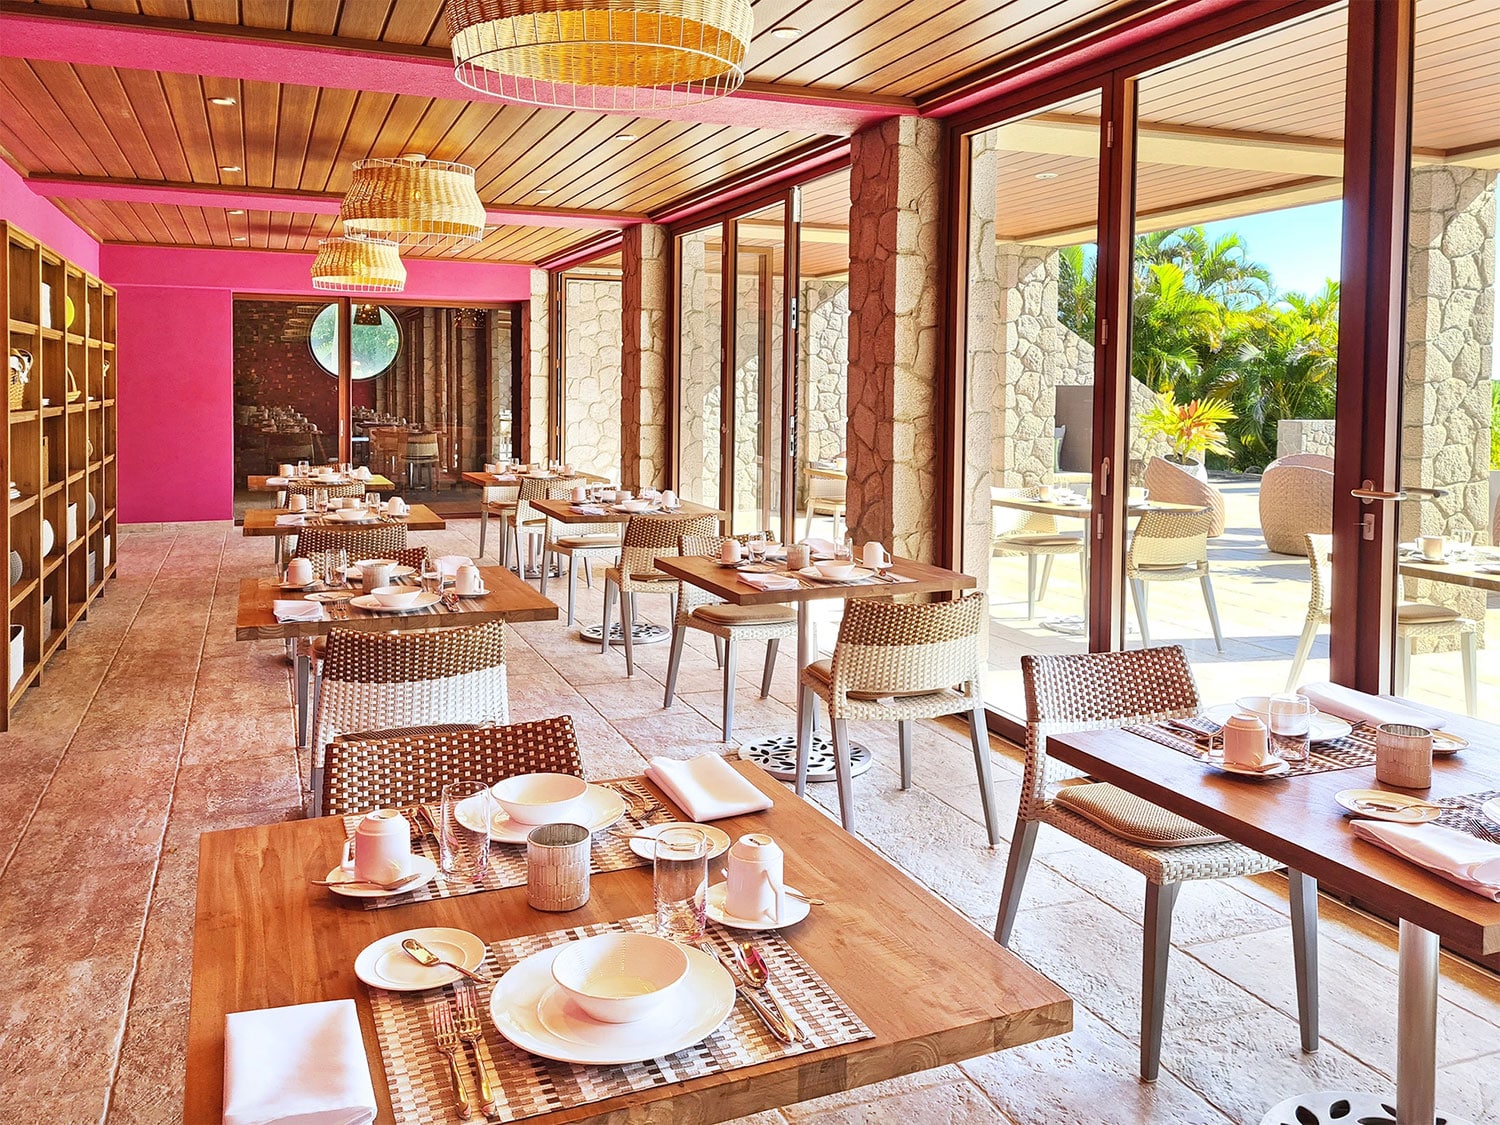 The dining room at the Mesa restaurant in Coulibri Ridge on the Caribbean island of Dominica.